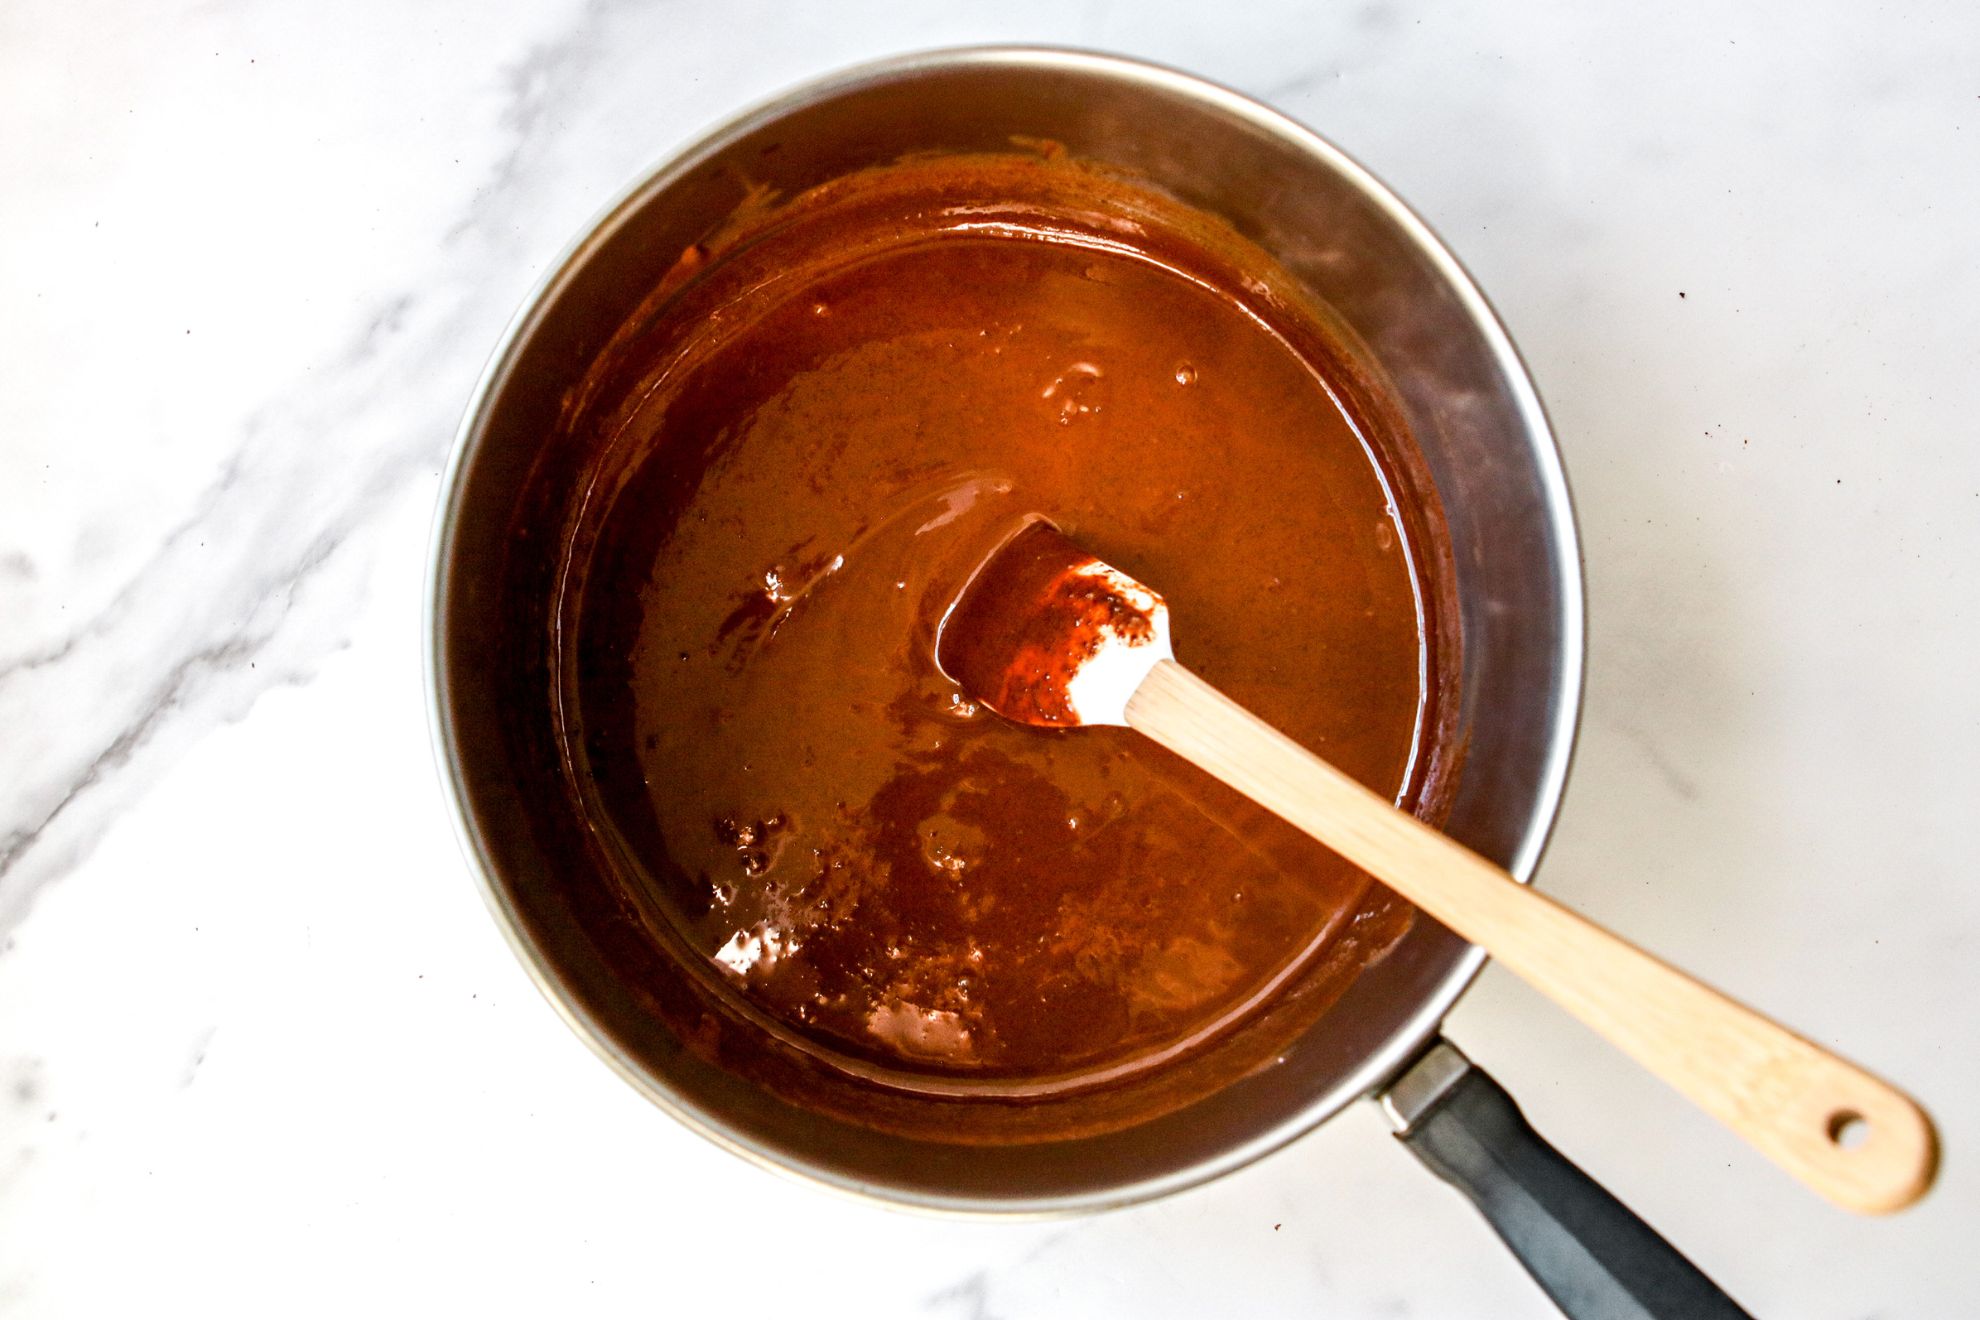 This is an overhead image of a saucepan with melted chocolate in it. The pot sits on a white marble surface. A small white rubber spatula is dipped into the chocolate and the wooden handle is leaning against the side of the pot, to the right bottom corner.